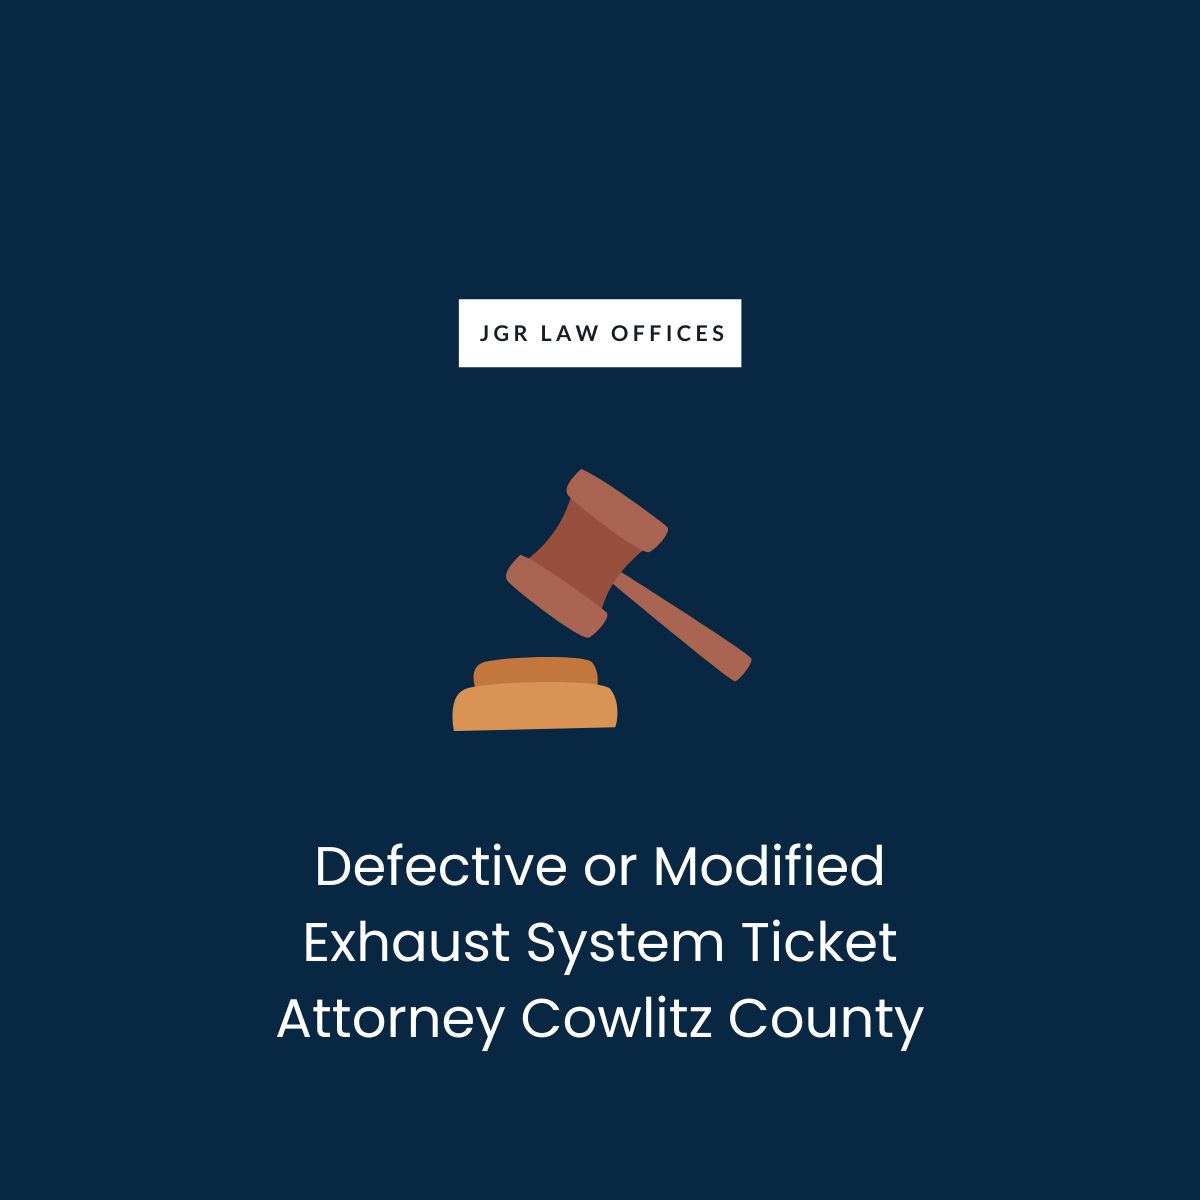 Defective or Modified Exhaust System Ticket Attorney Cowlitz County